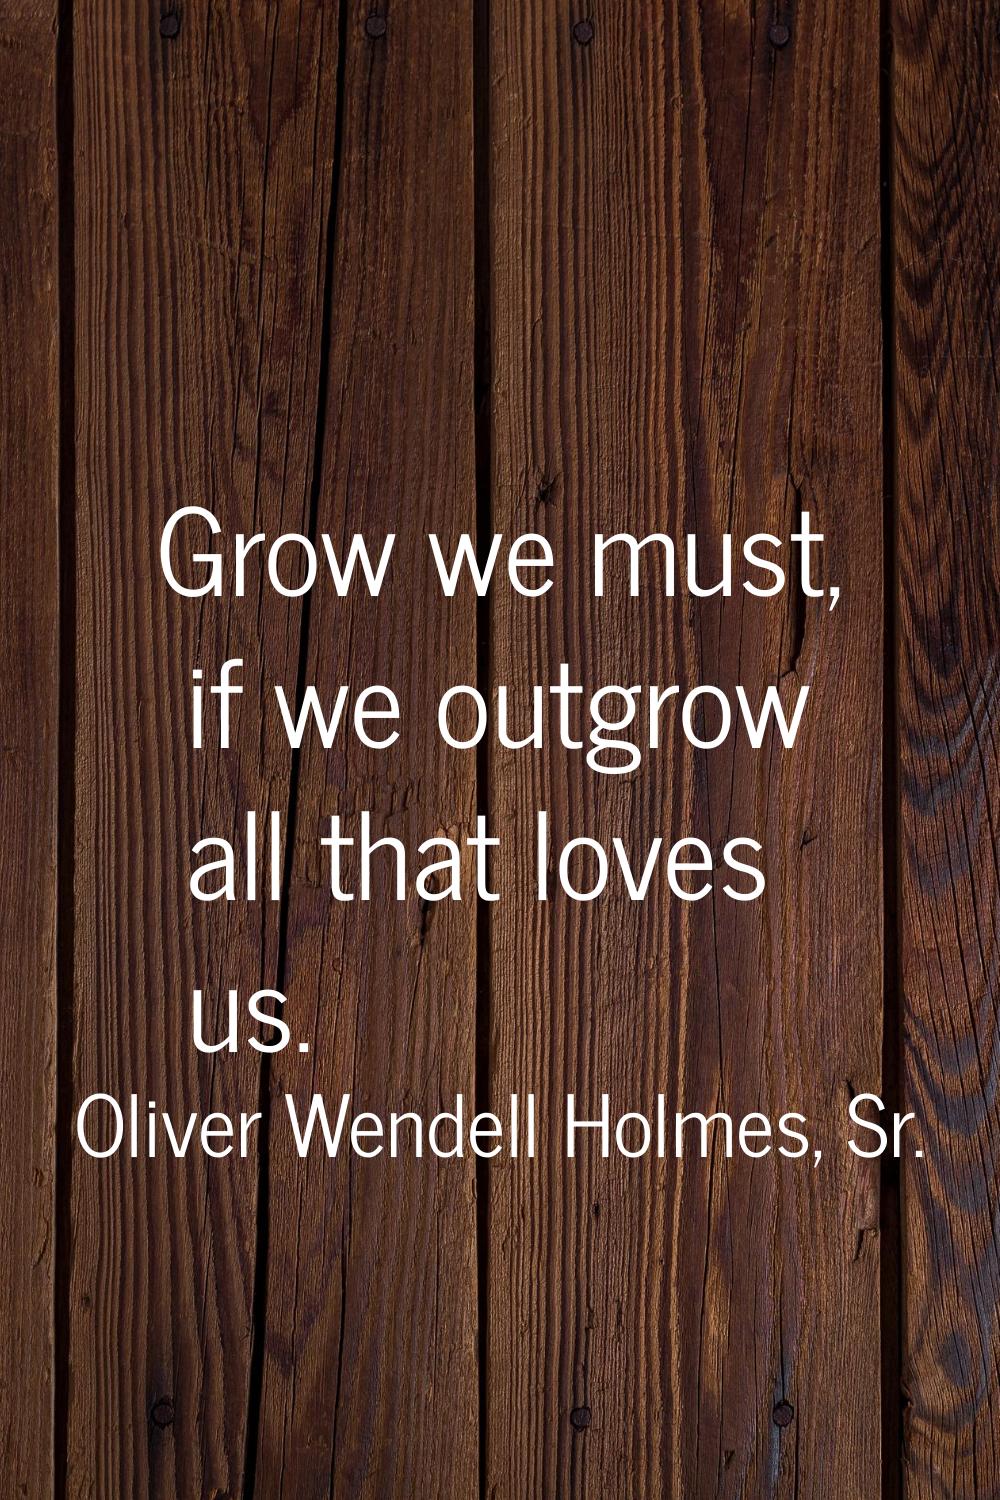 Grow we must, if we outgrow all that loves us.